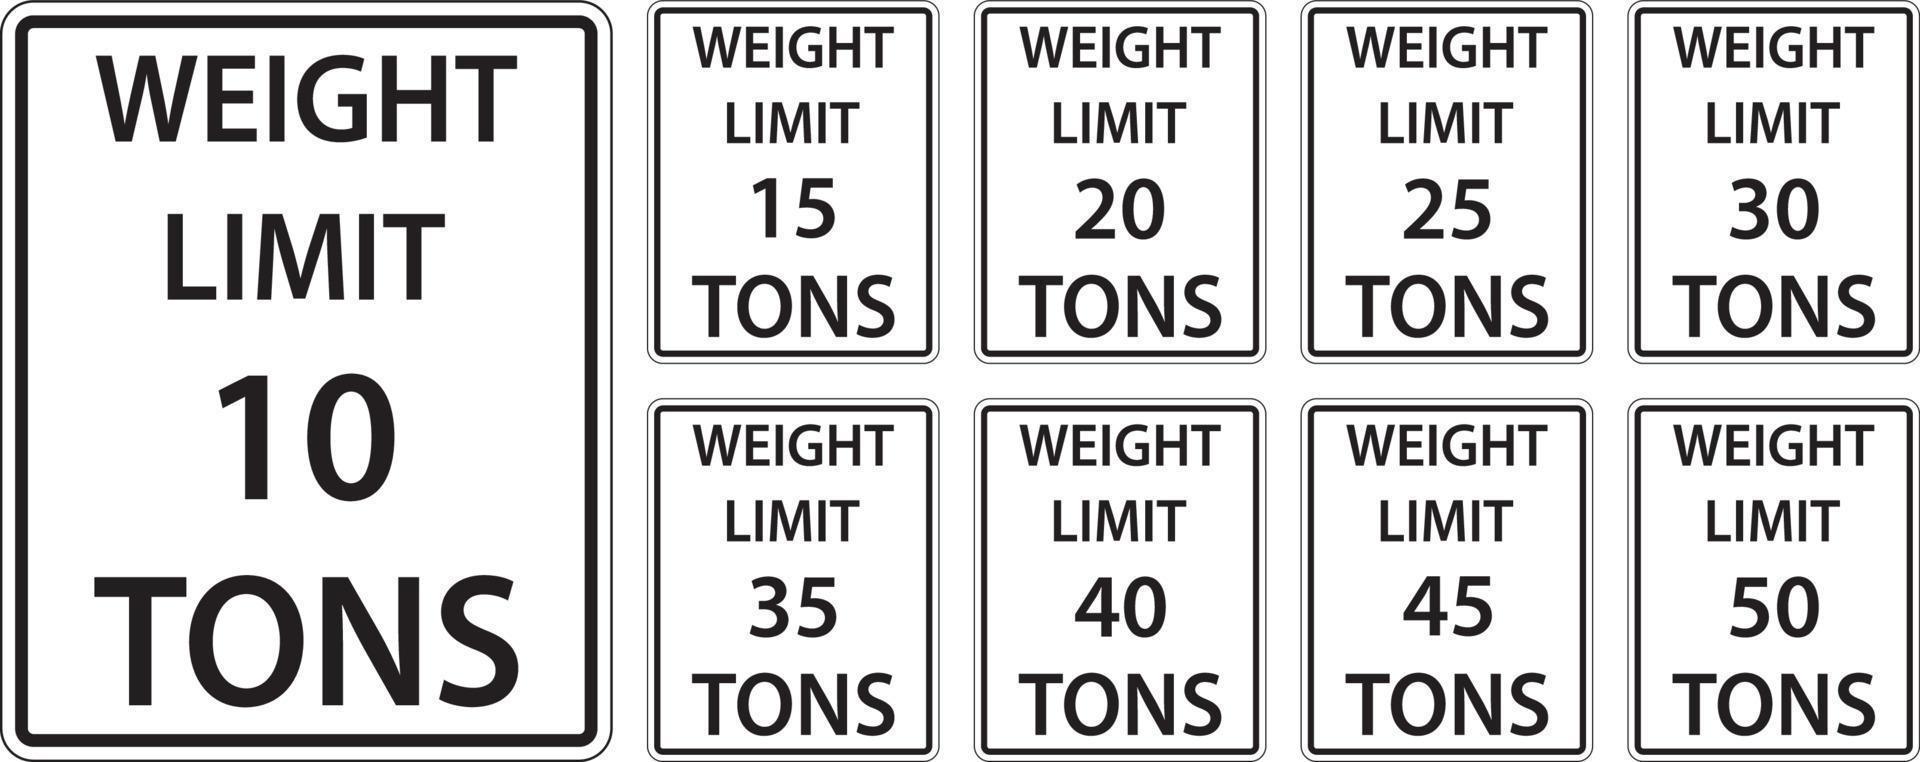 Weight Limit Set Sign On White Background vector